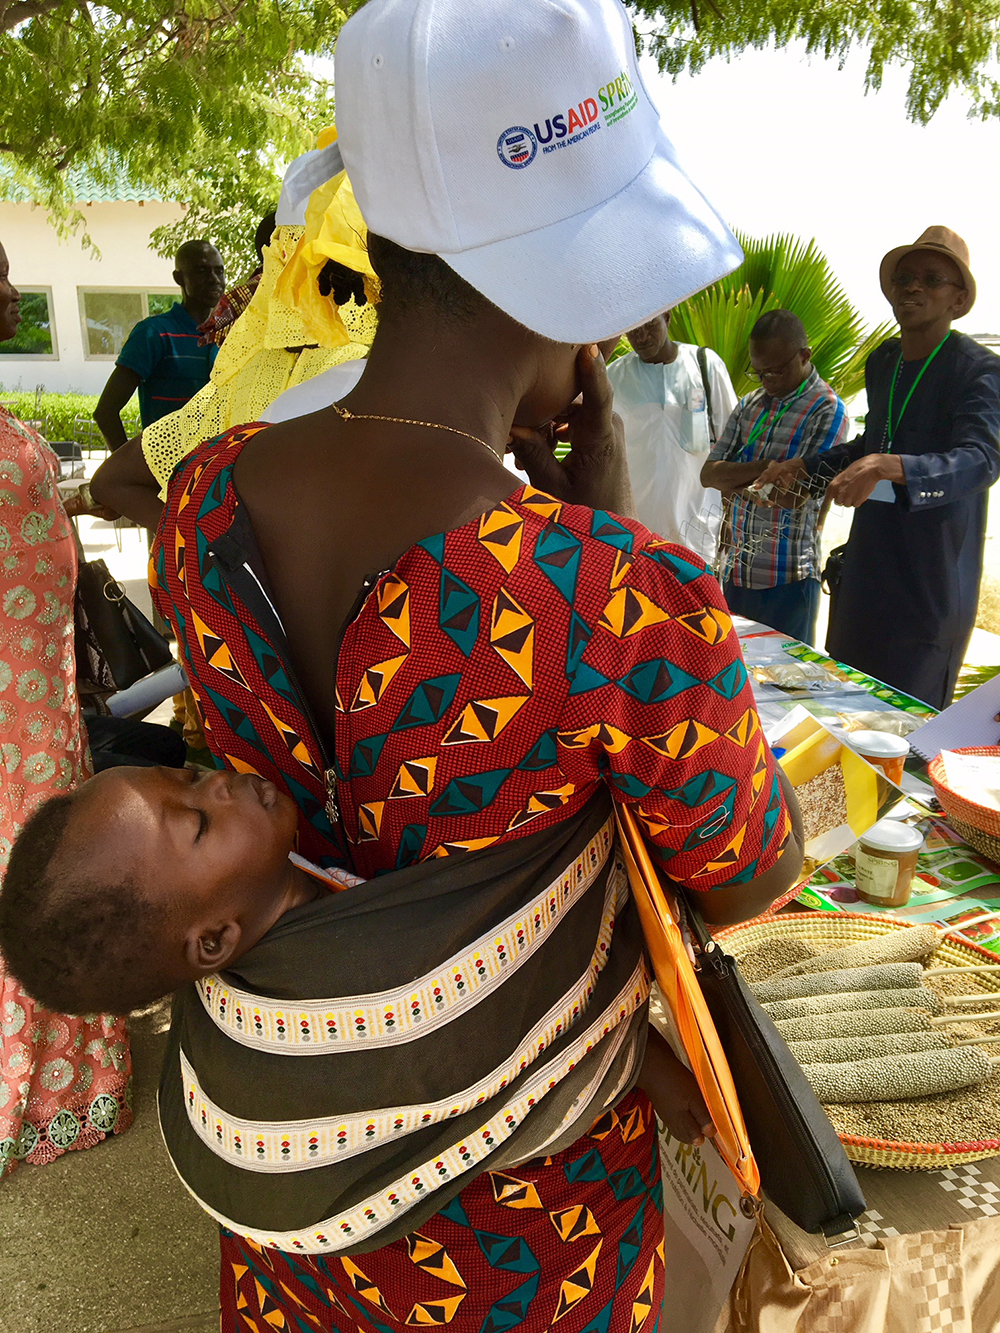 A mother listens to learn more about the project’s achievements with her baby strapped to her back.